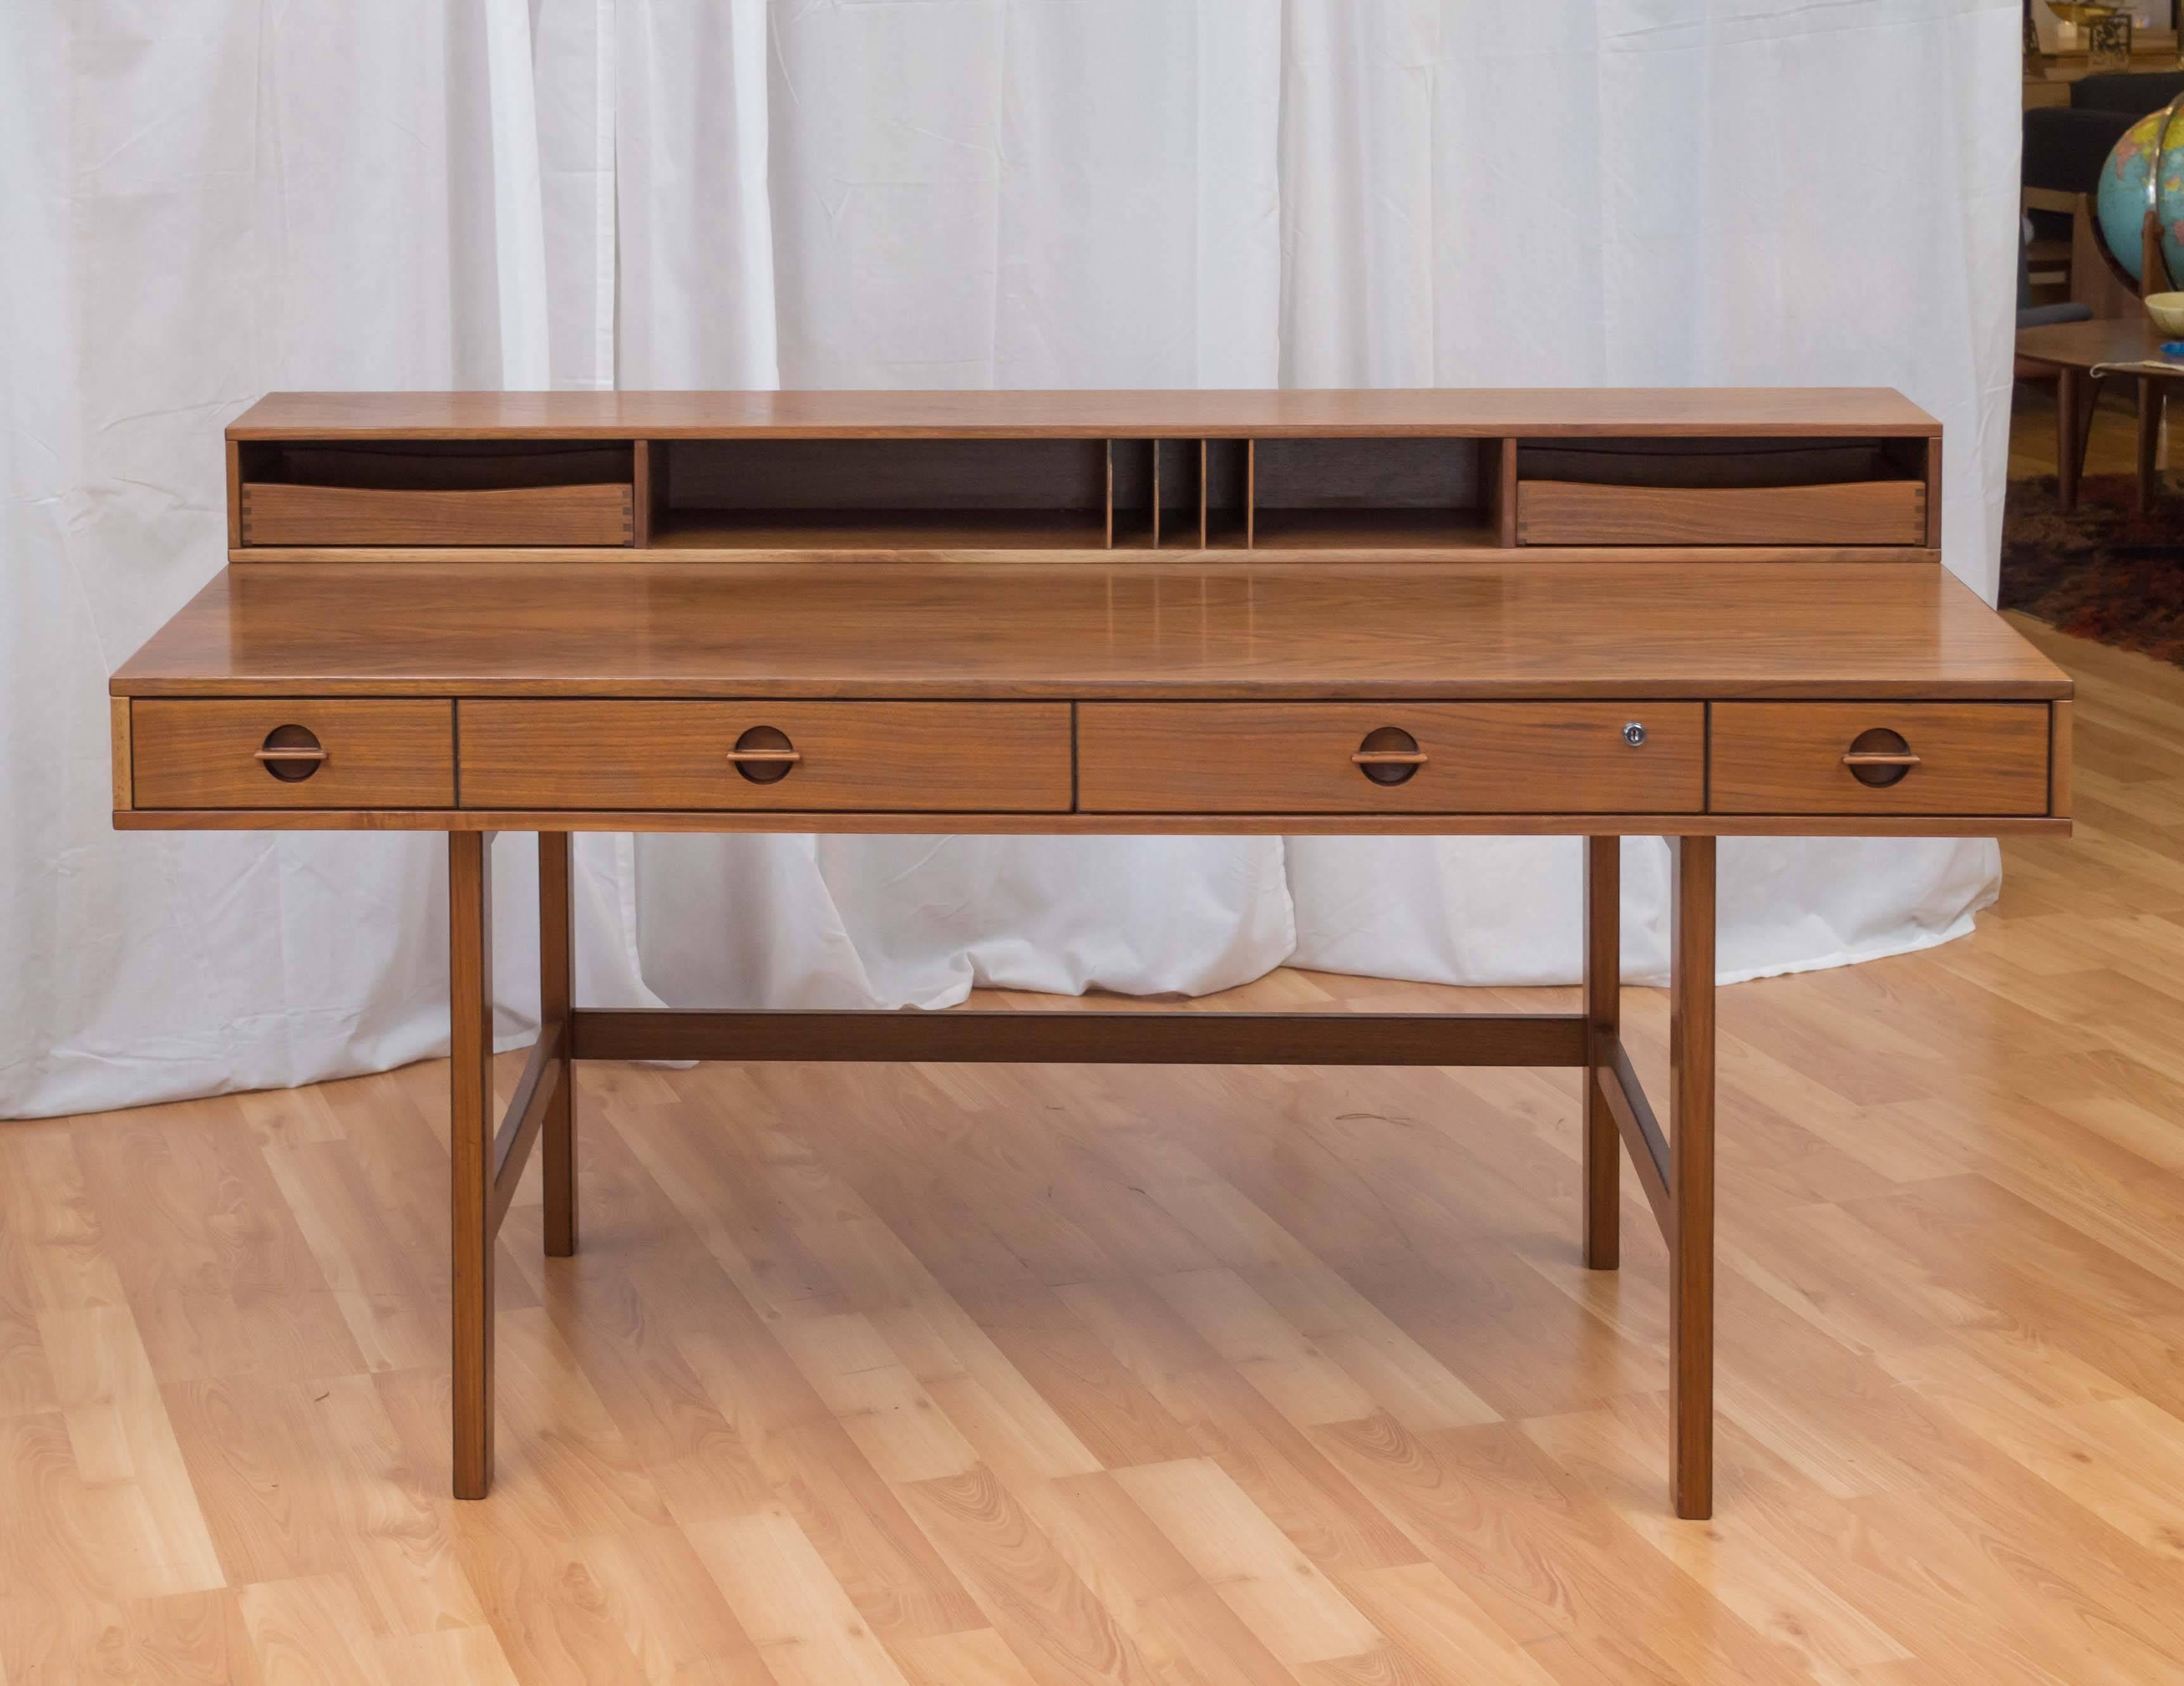 An expansive, expandable, and altogether stunning Danish modern walnut desk by Jens Quistgaard for Peter Løvig Nielsen.

Defined by clean architectural lines and elongated rectangular forms, this clever desk can be used with its hinged top section